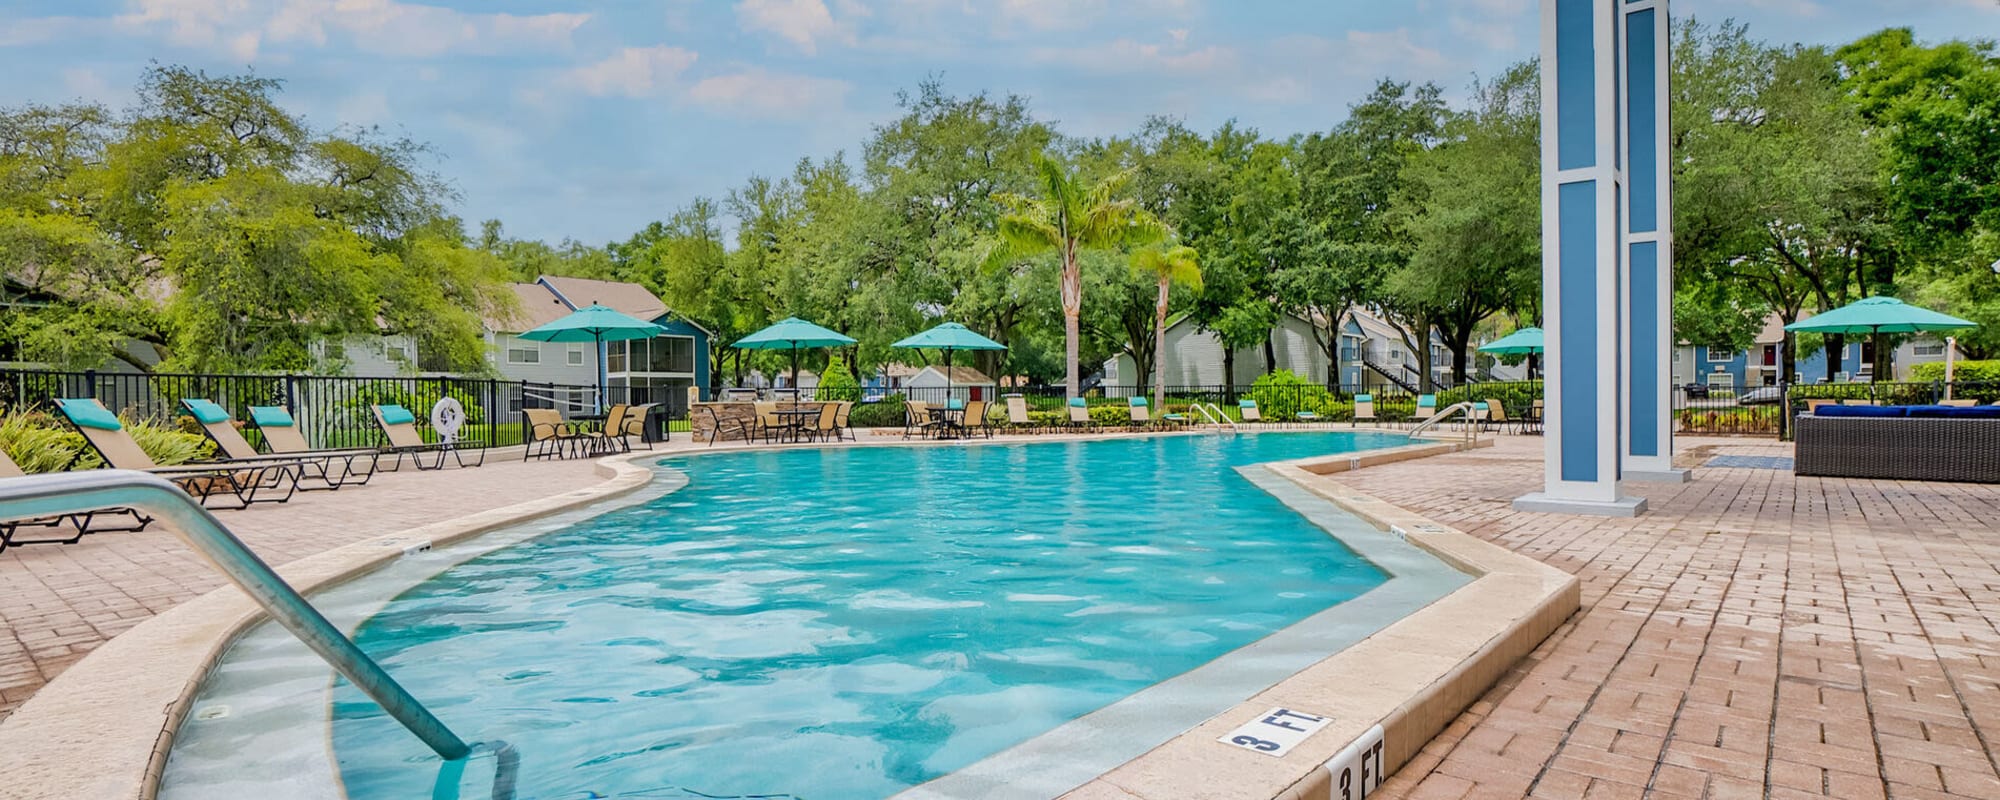 Apartments at The Crest at Altamonte in Altamonte Springs, Florida